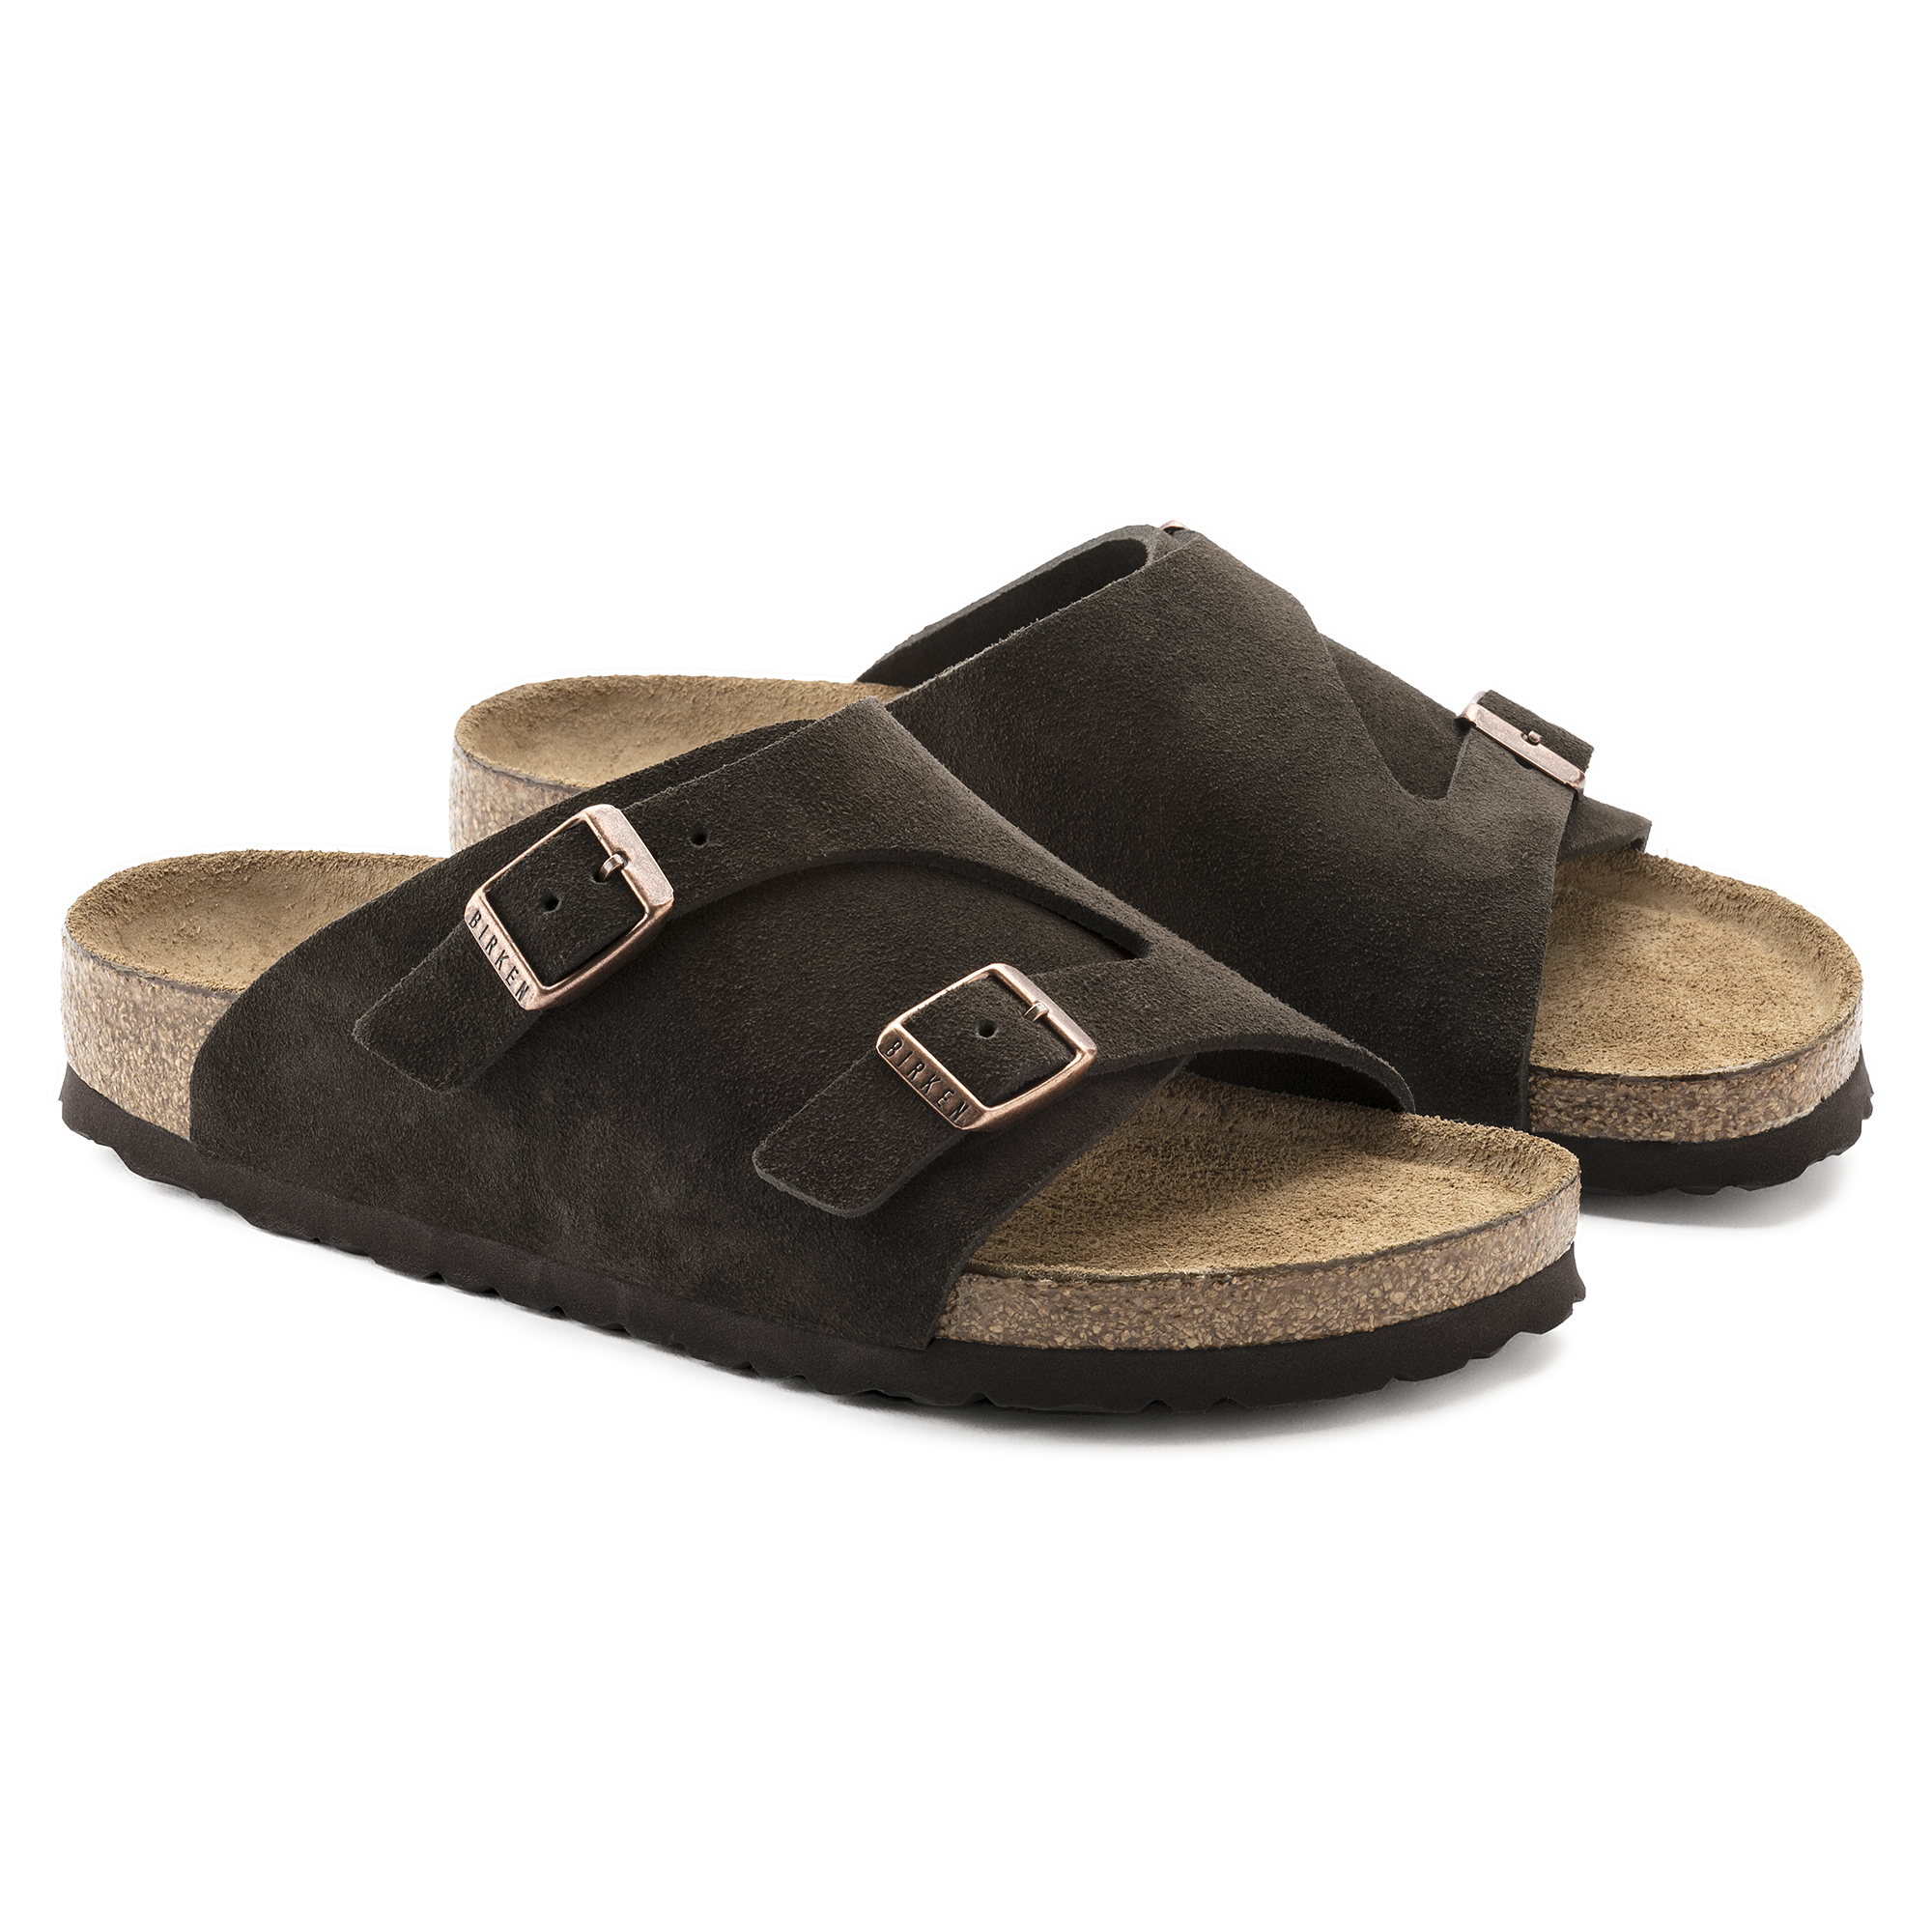 Zürich Soft Footbed Suede Leather